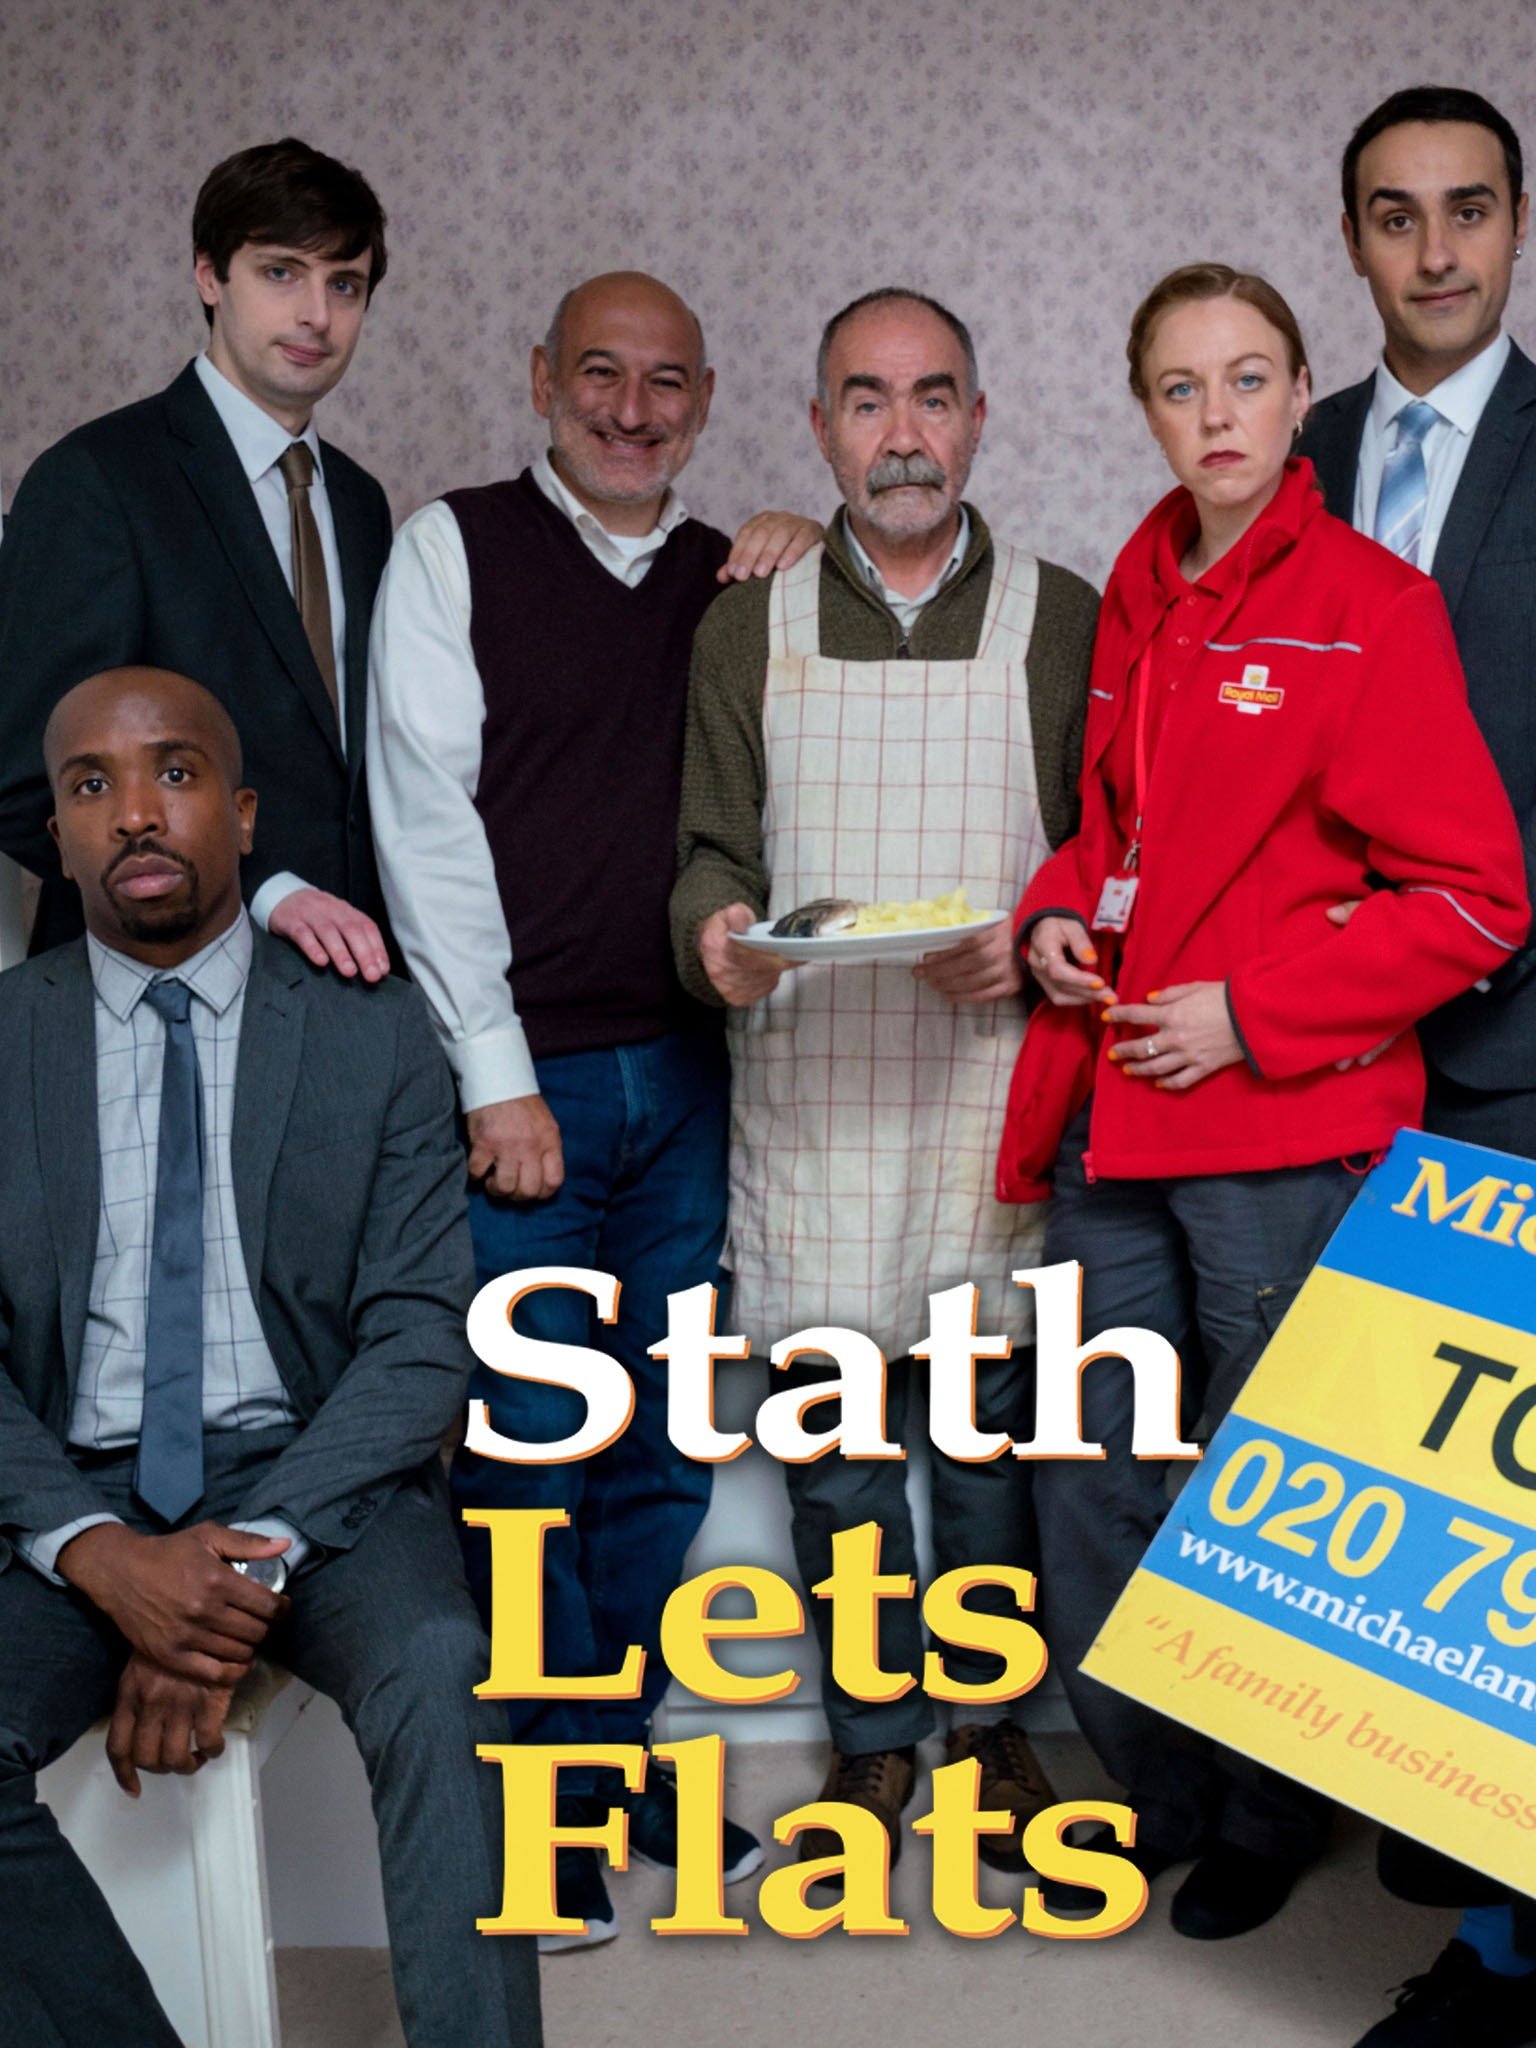 stath lets flats s01e02 watch